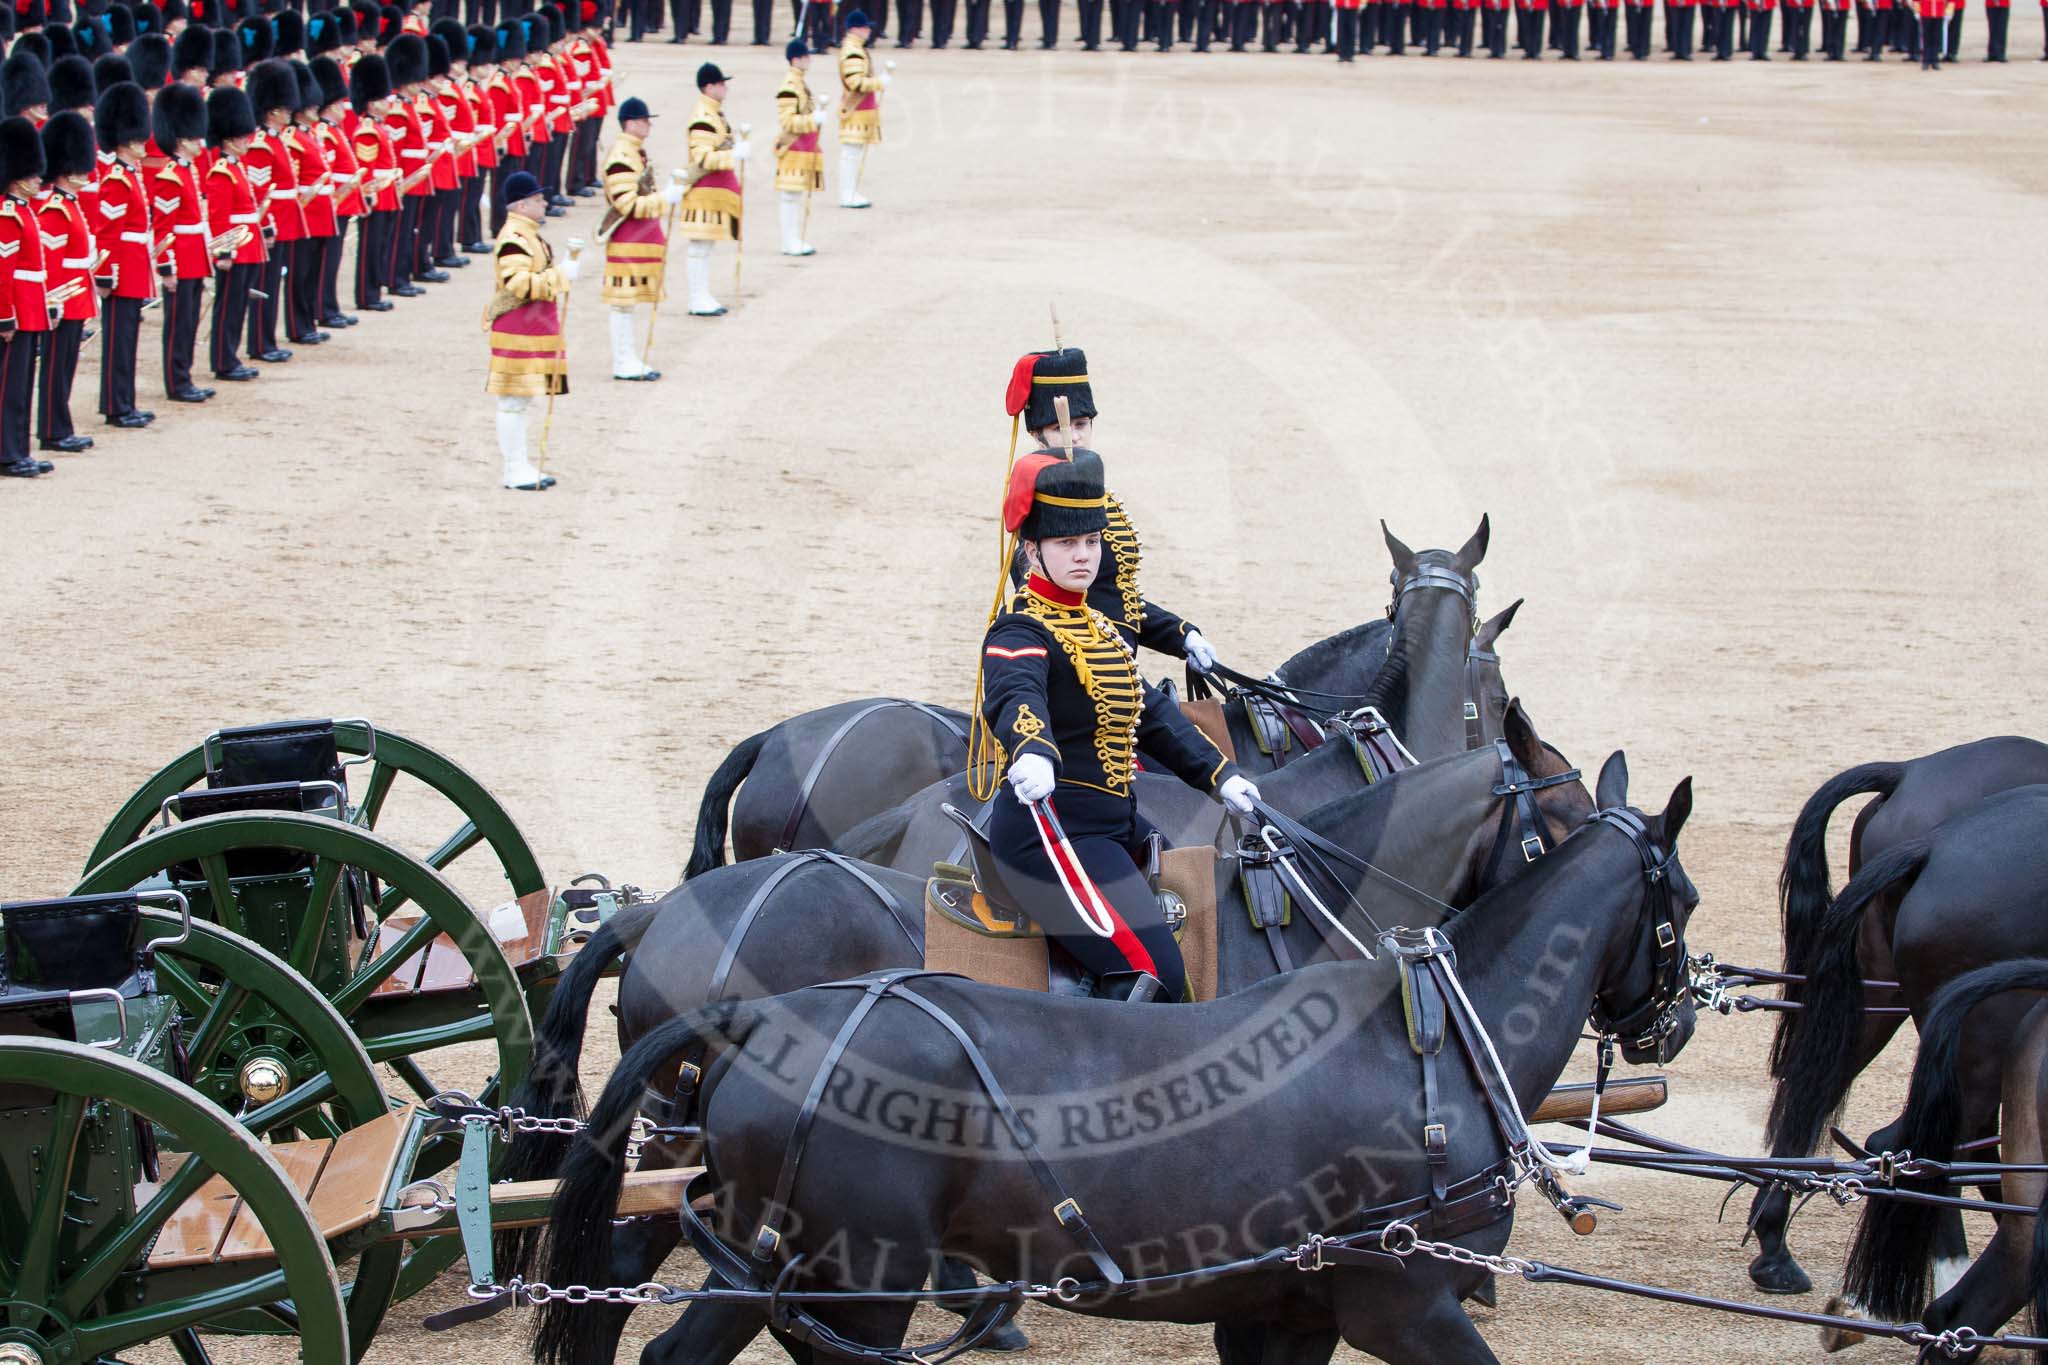 Trooping the Colour 2012: Saluting with the whip - Royal Horse Artillery during the Ride Past..
Horse Guards Parade, Westminster,
London SW1,

United Kingdom,
on 16 June 2012 at 11:55, image #552